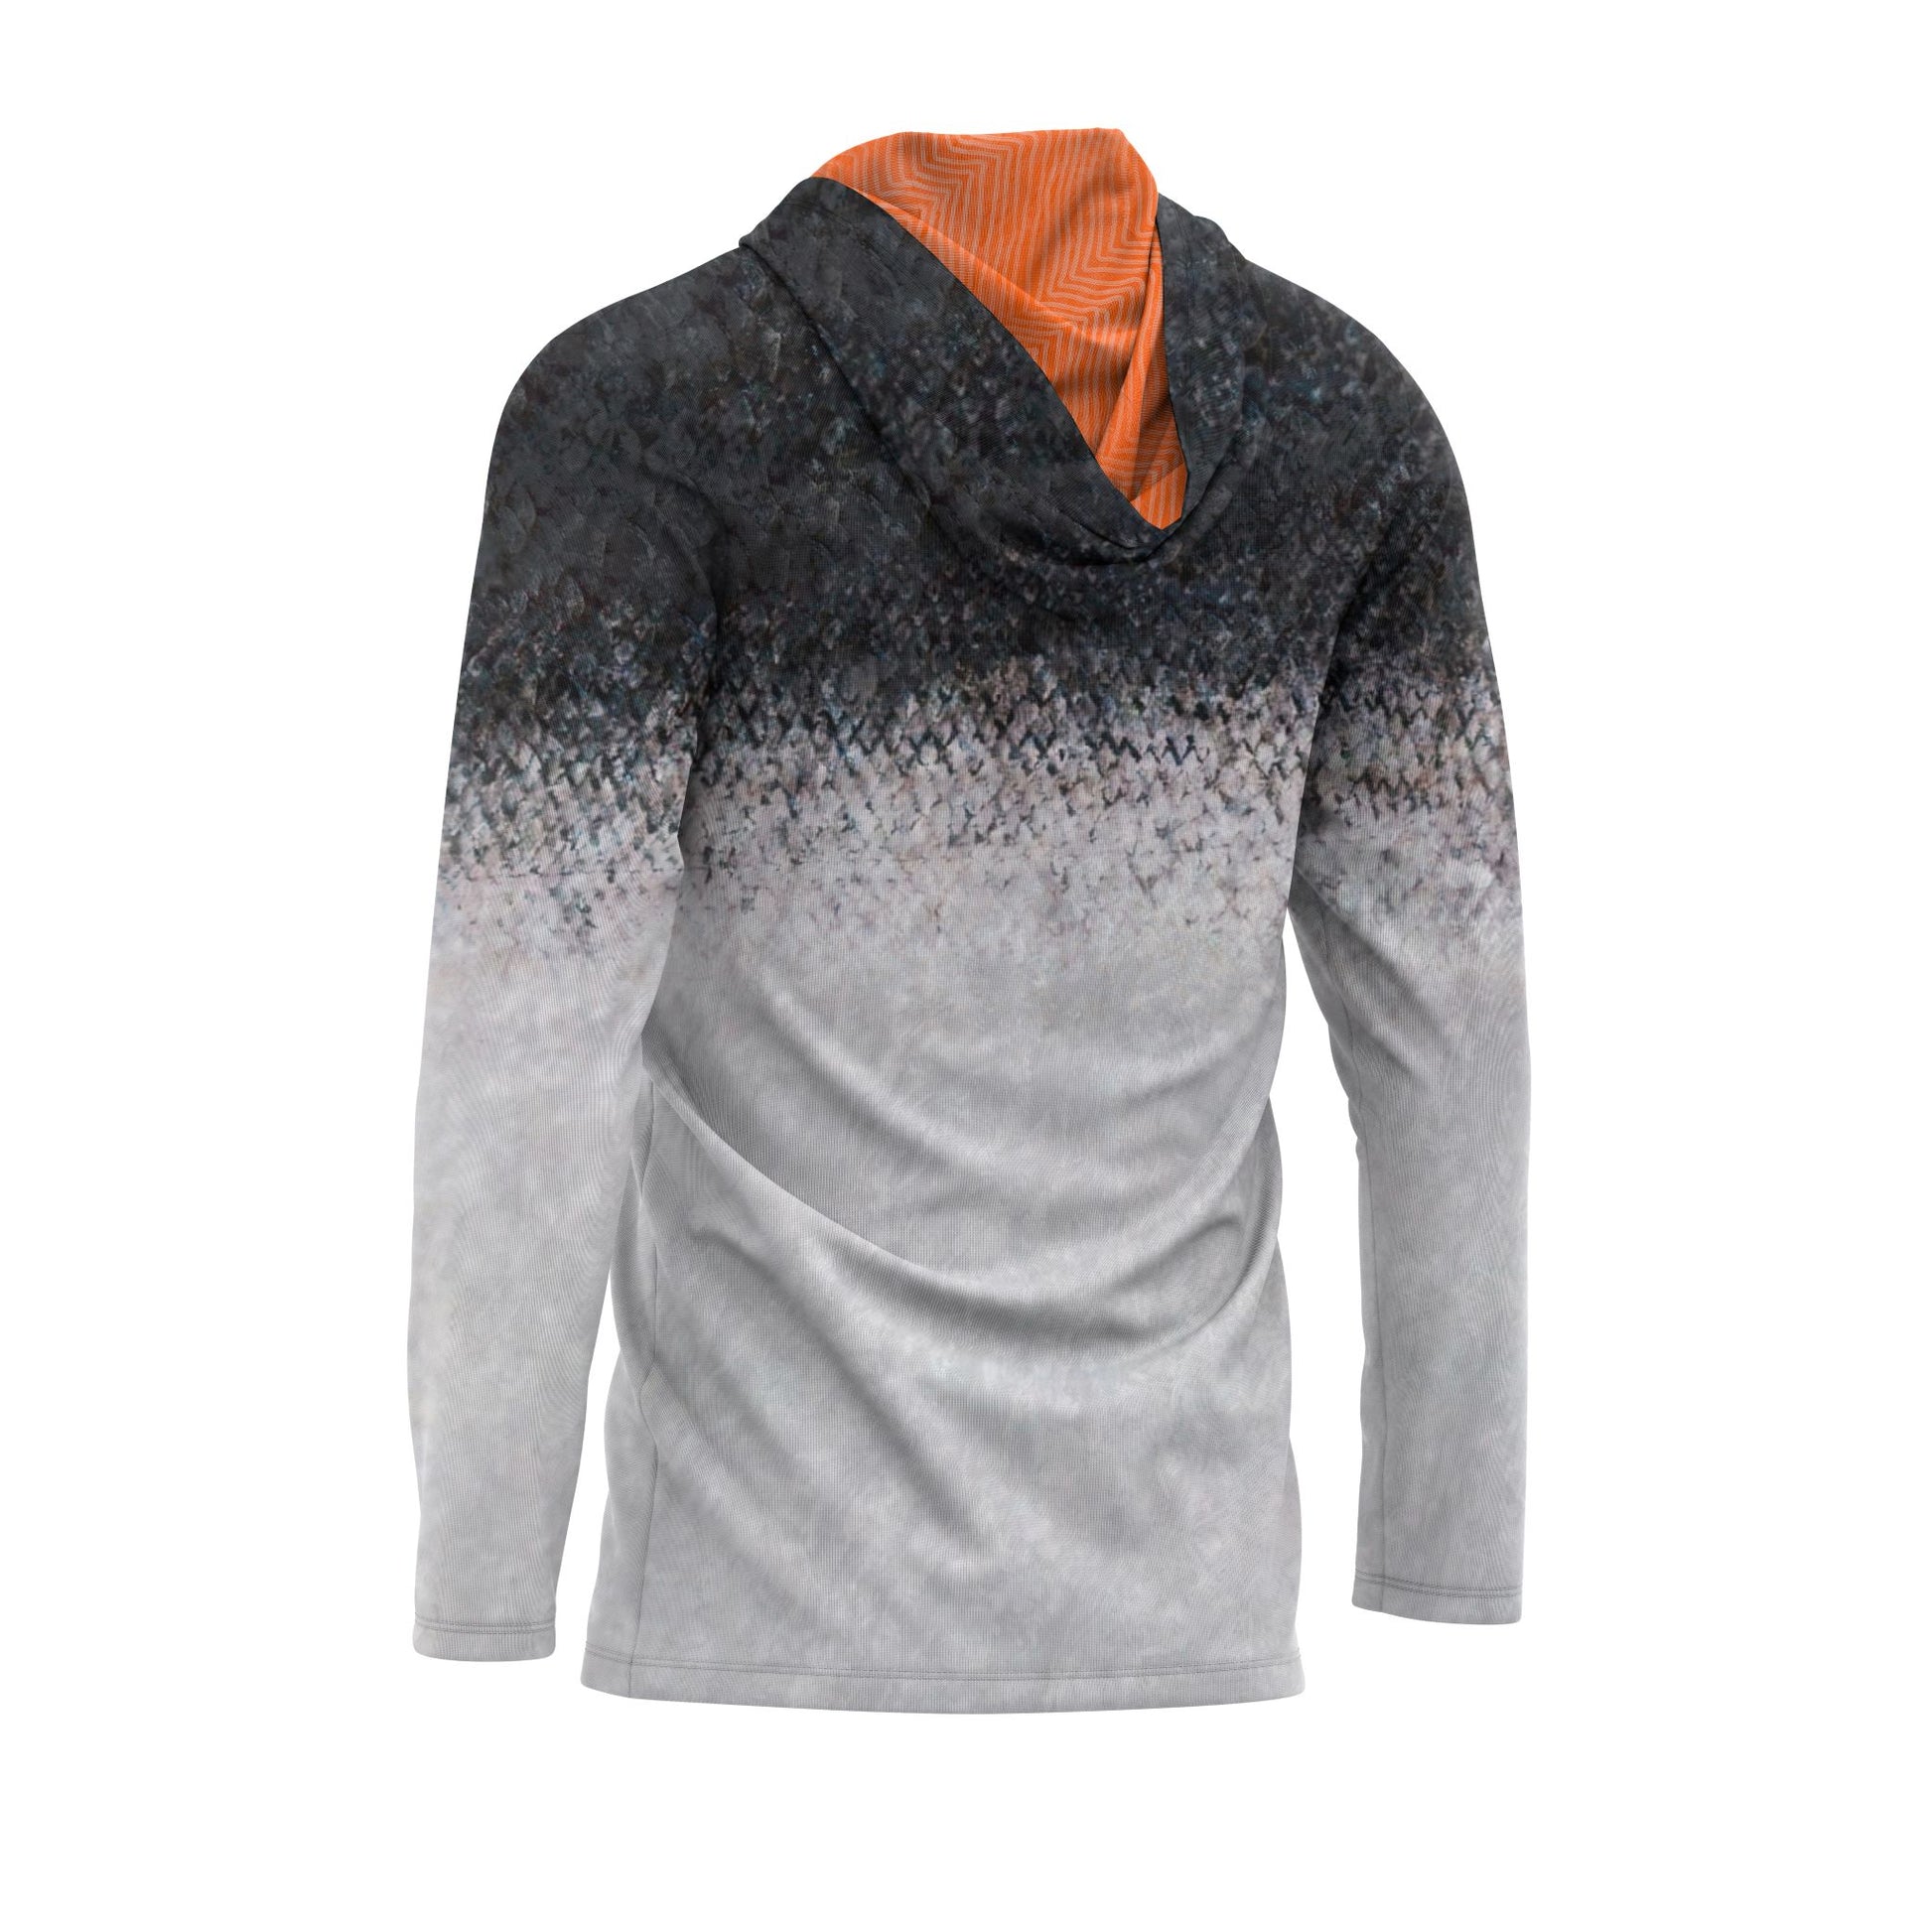 Salmon Hooded Sport Tec Performance Shirt, Long Sleeve – Seatec Outfitters